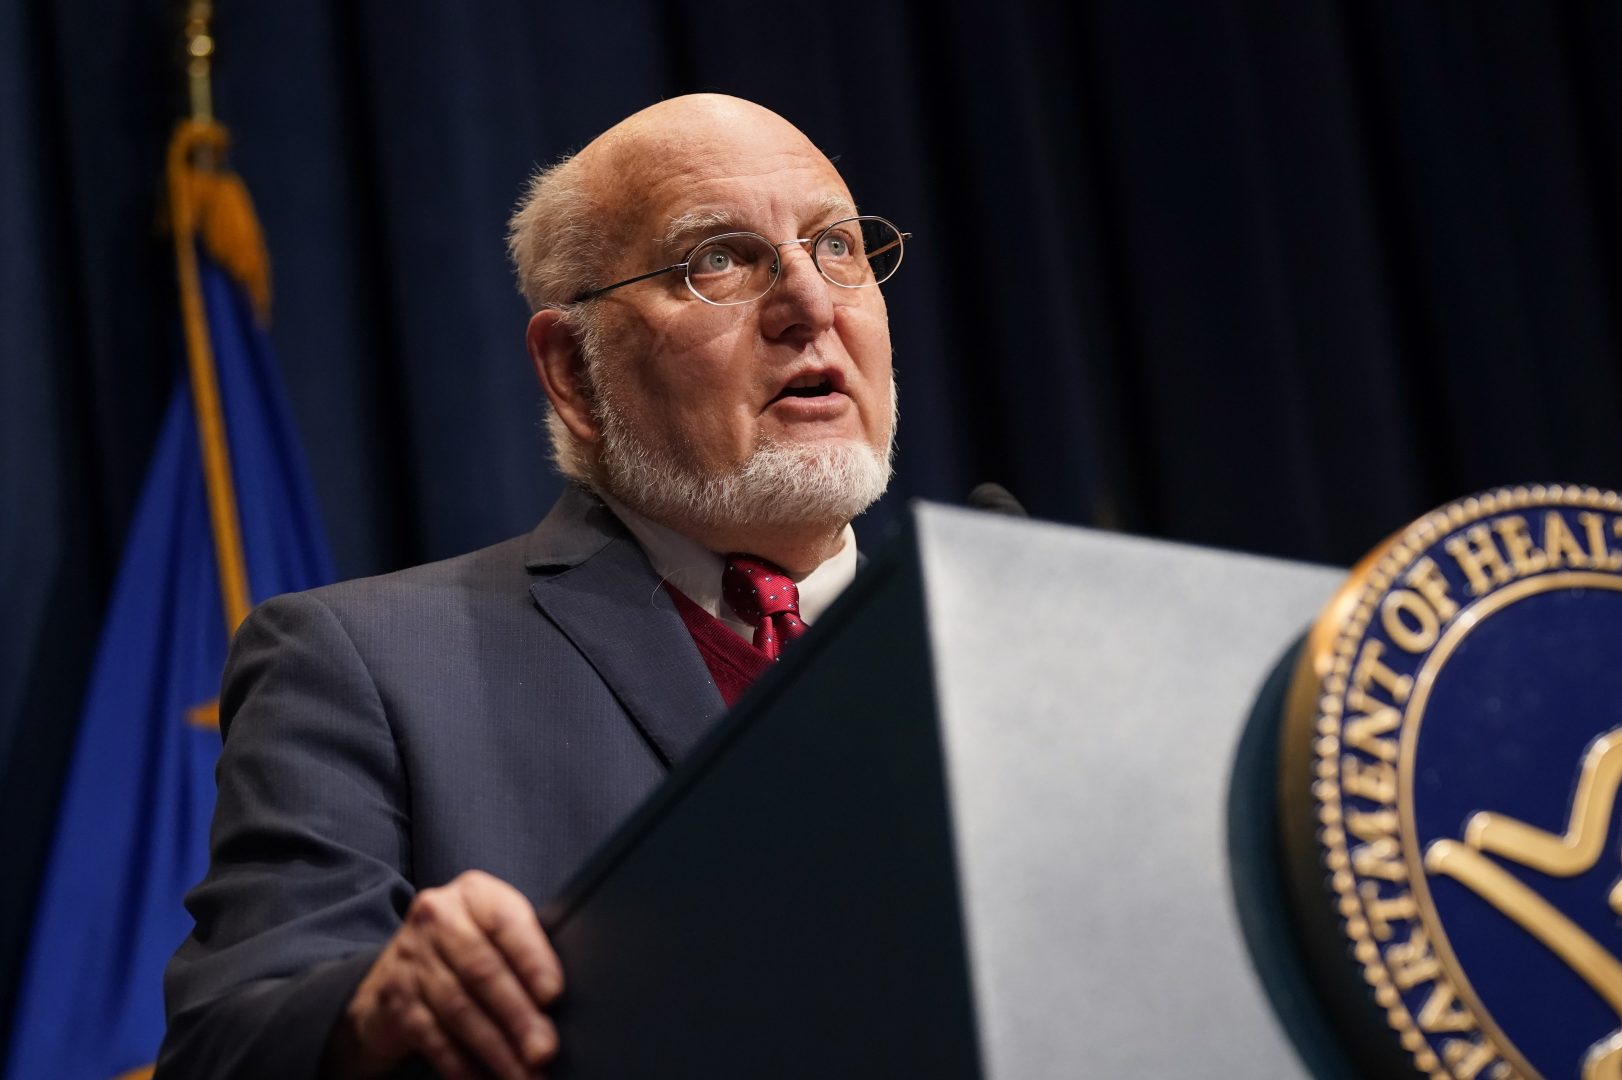 Dr. Robert Redfield, director of the Centers for Disease Control and Prevention, speaks during a news conference on Operation Warp Speed and COVID-19 vaccine distribution, Tuesday, Jan. 12, 2021, in Washington.